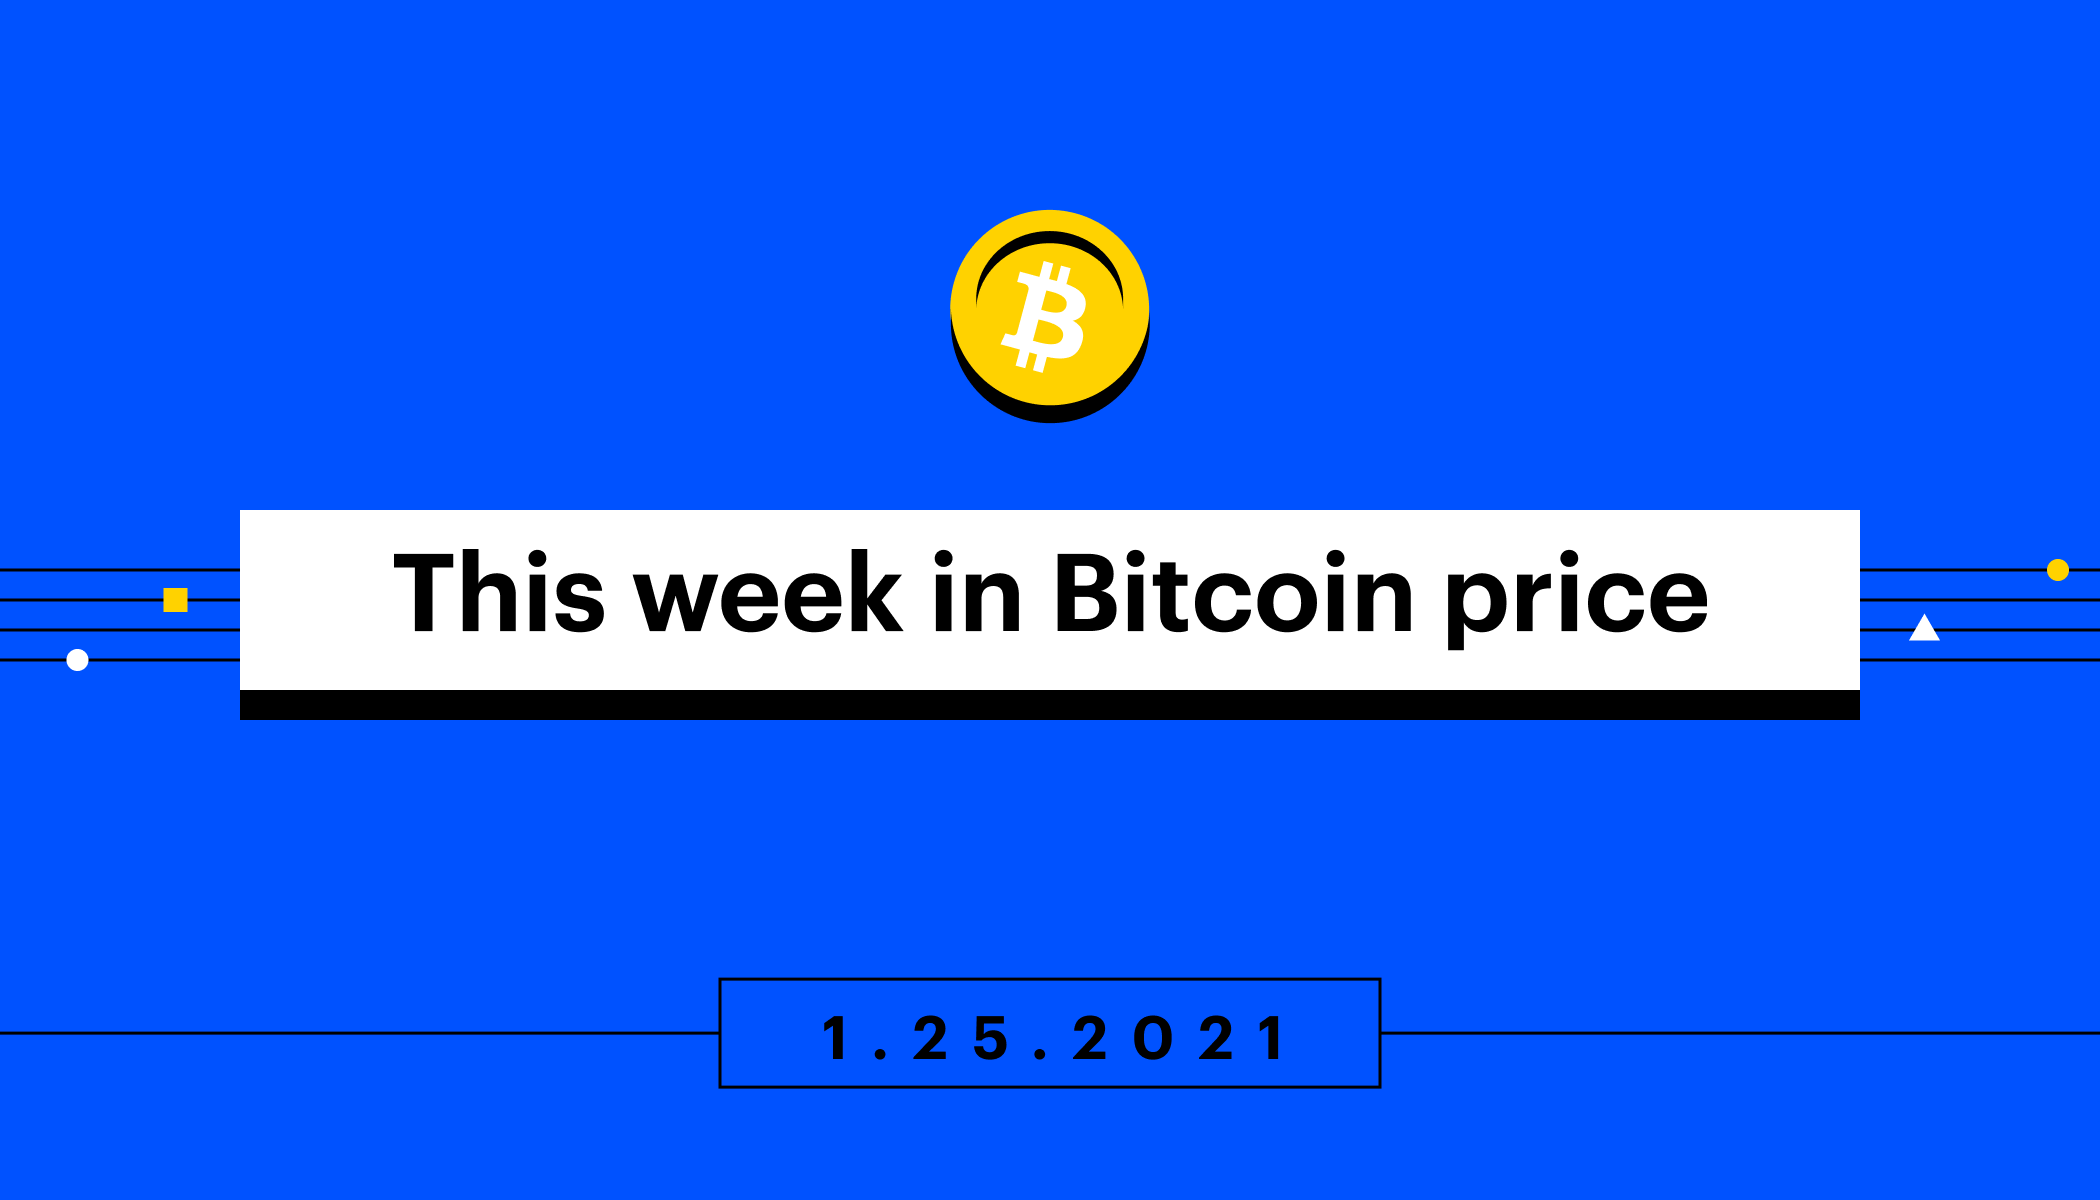 This week in Bitcoin price: Jan 19-25 | Coinbase